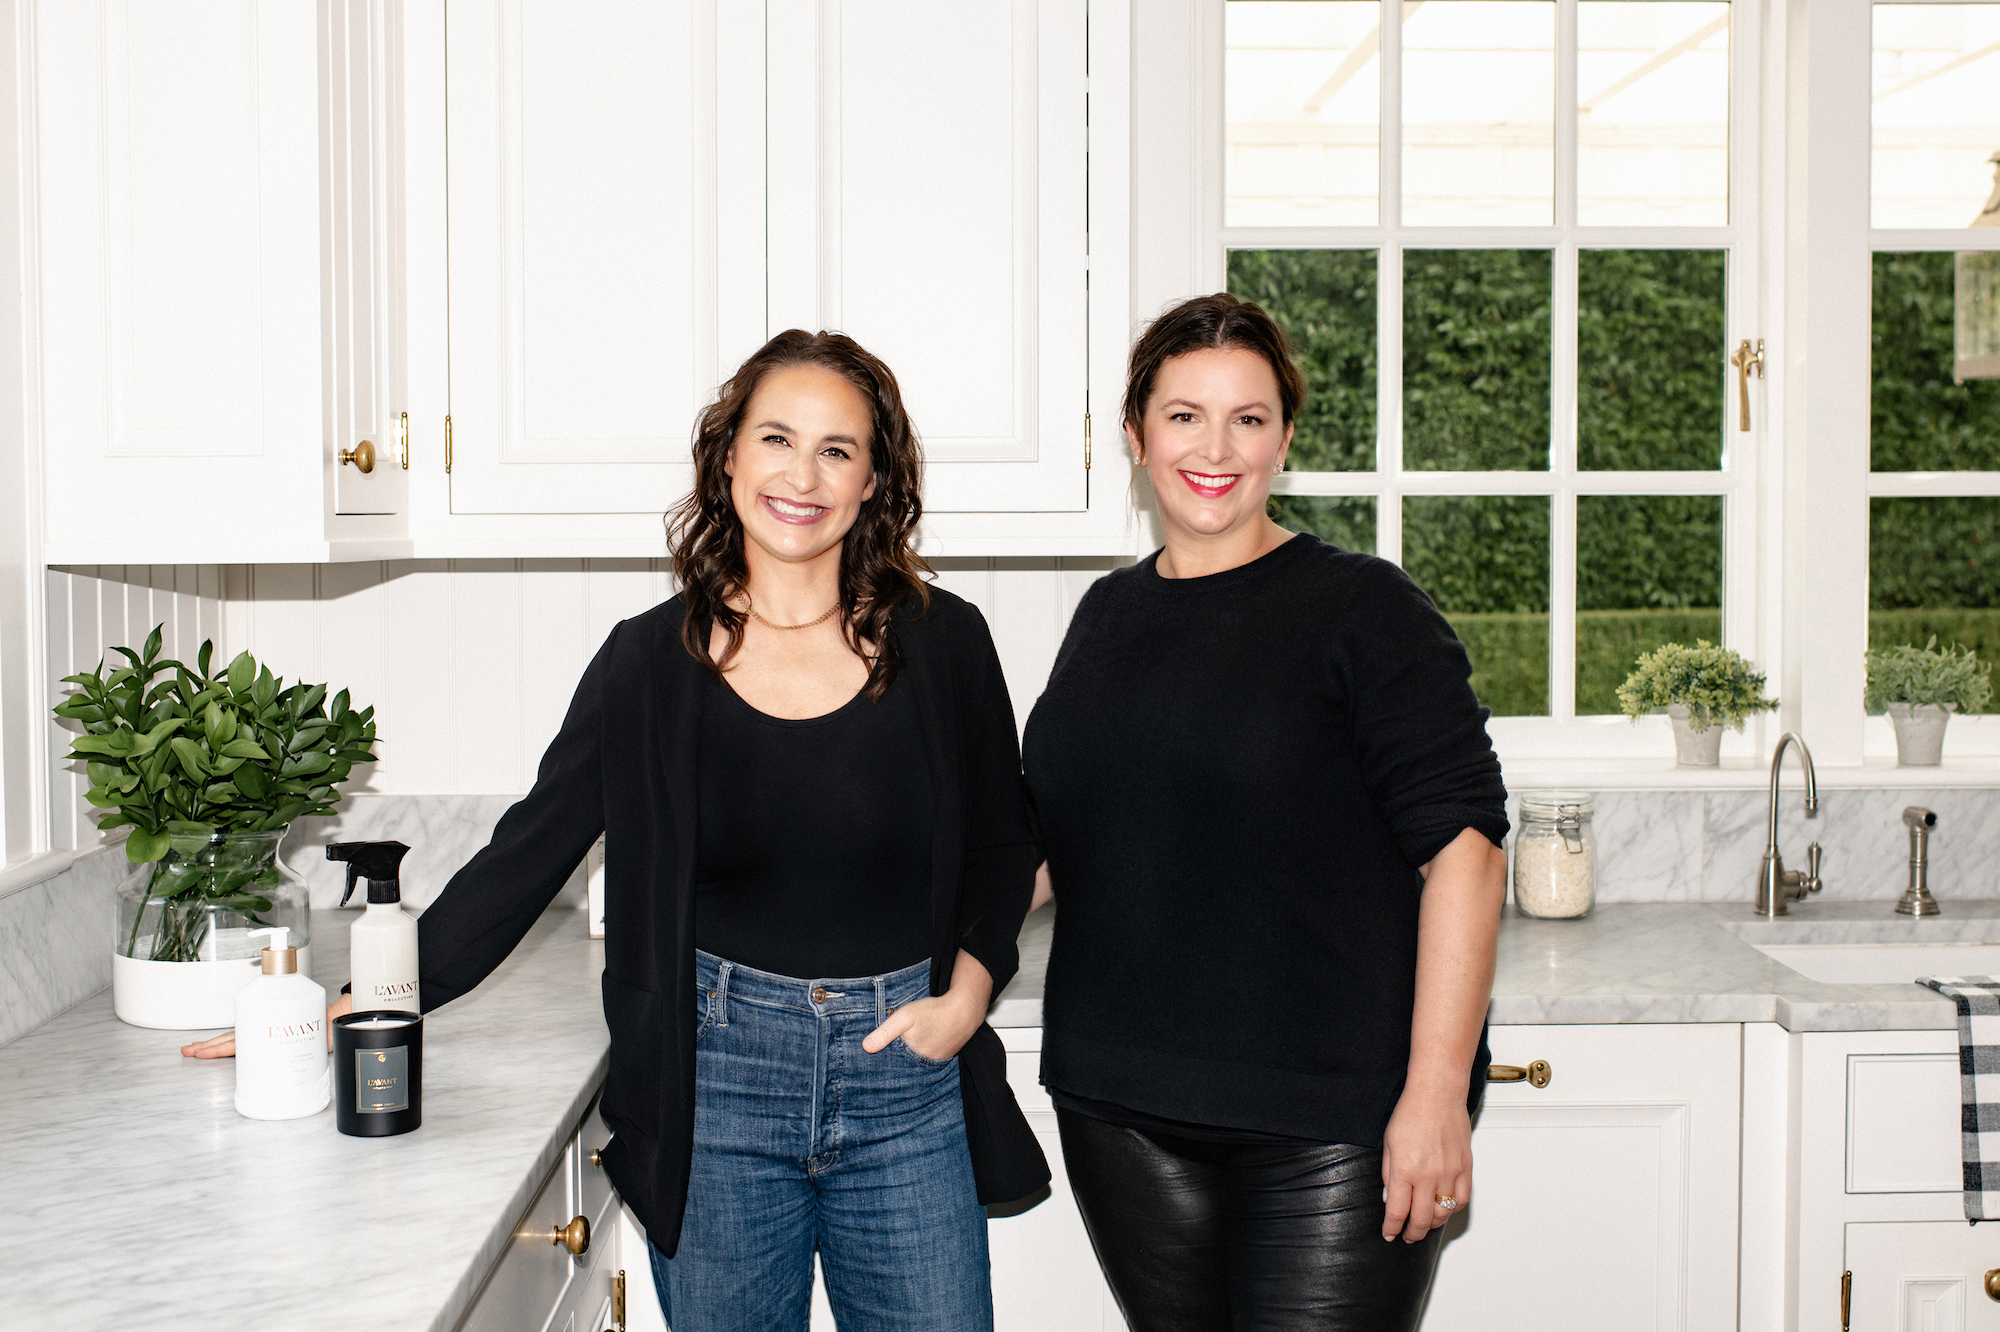 From left: Kristi Lord and Lindsay Droz, best friends and co-founders of L’AVANT Collective